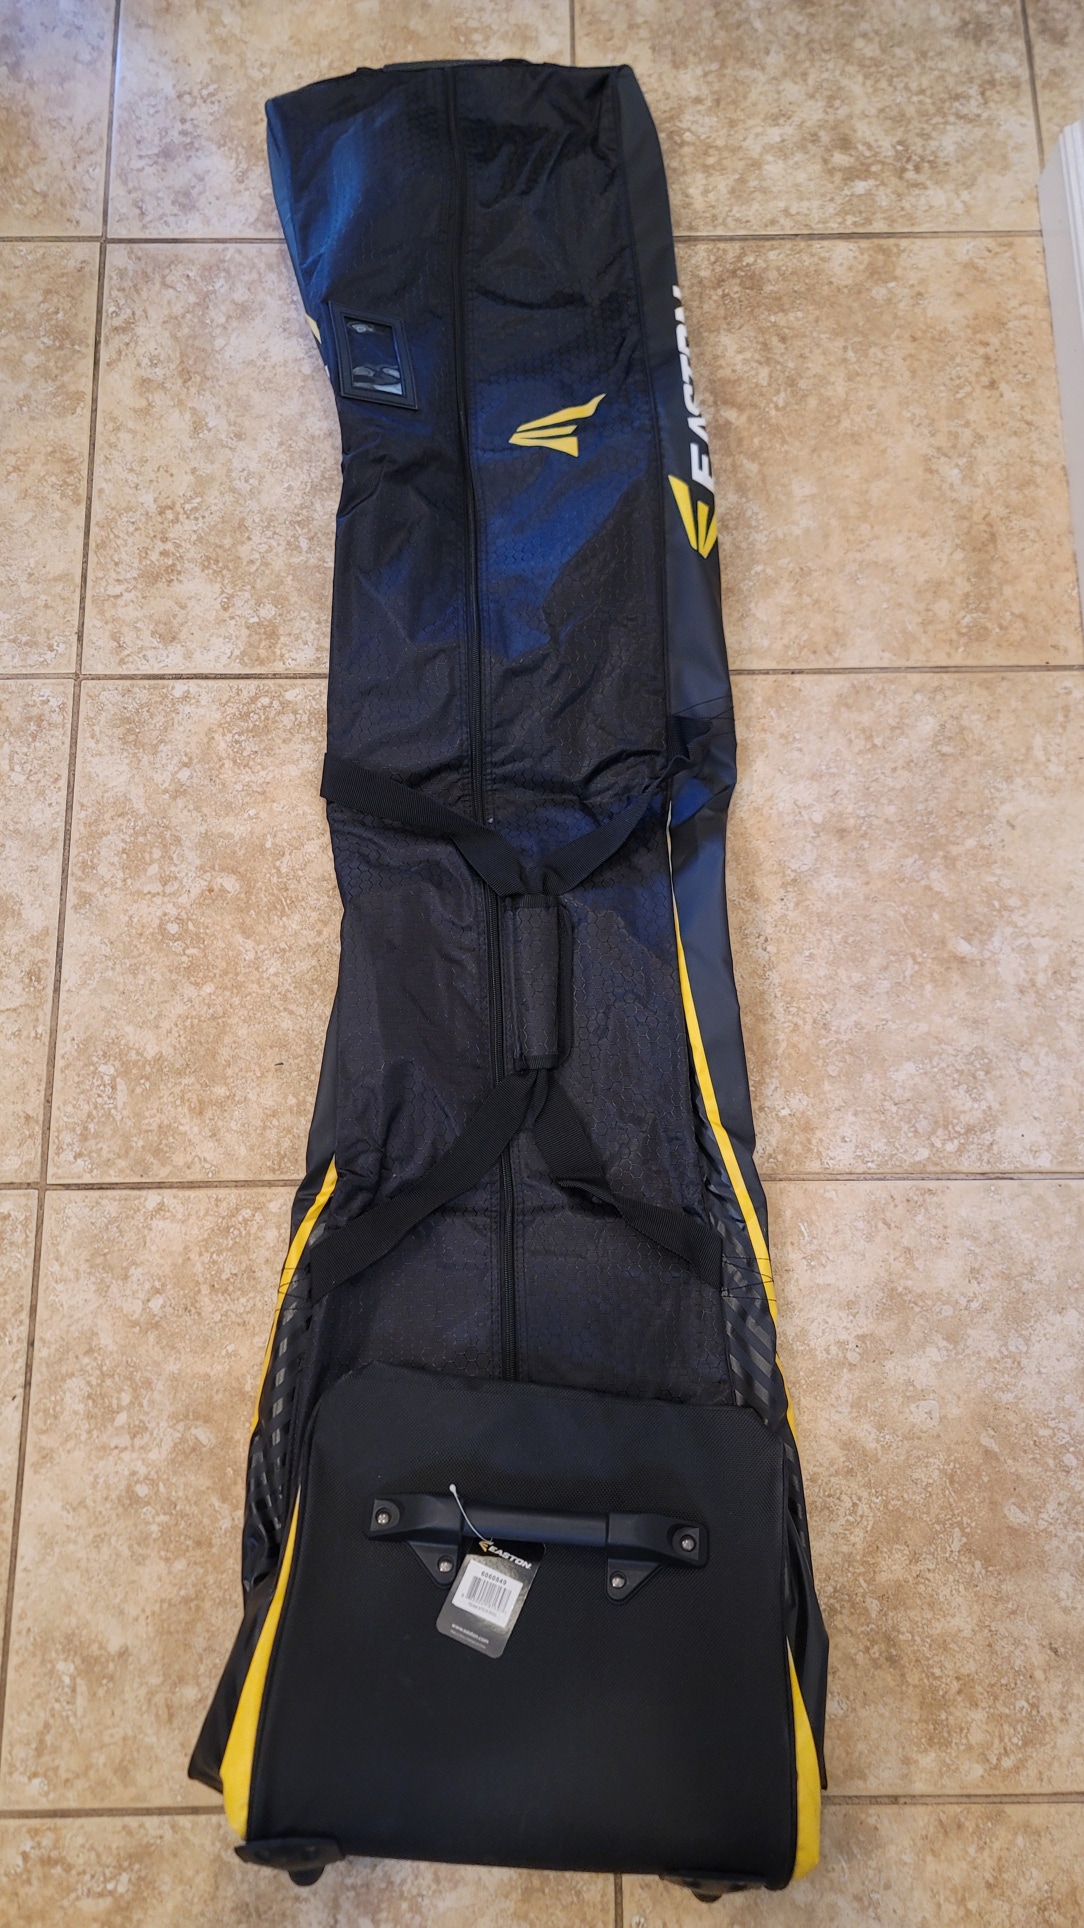 2 New Easton Hockey Stick Bags with Wheels